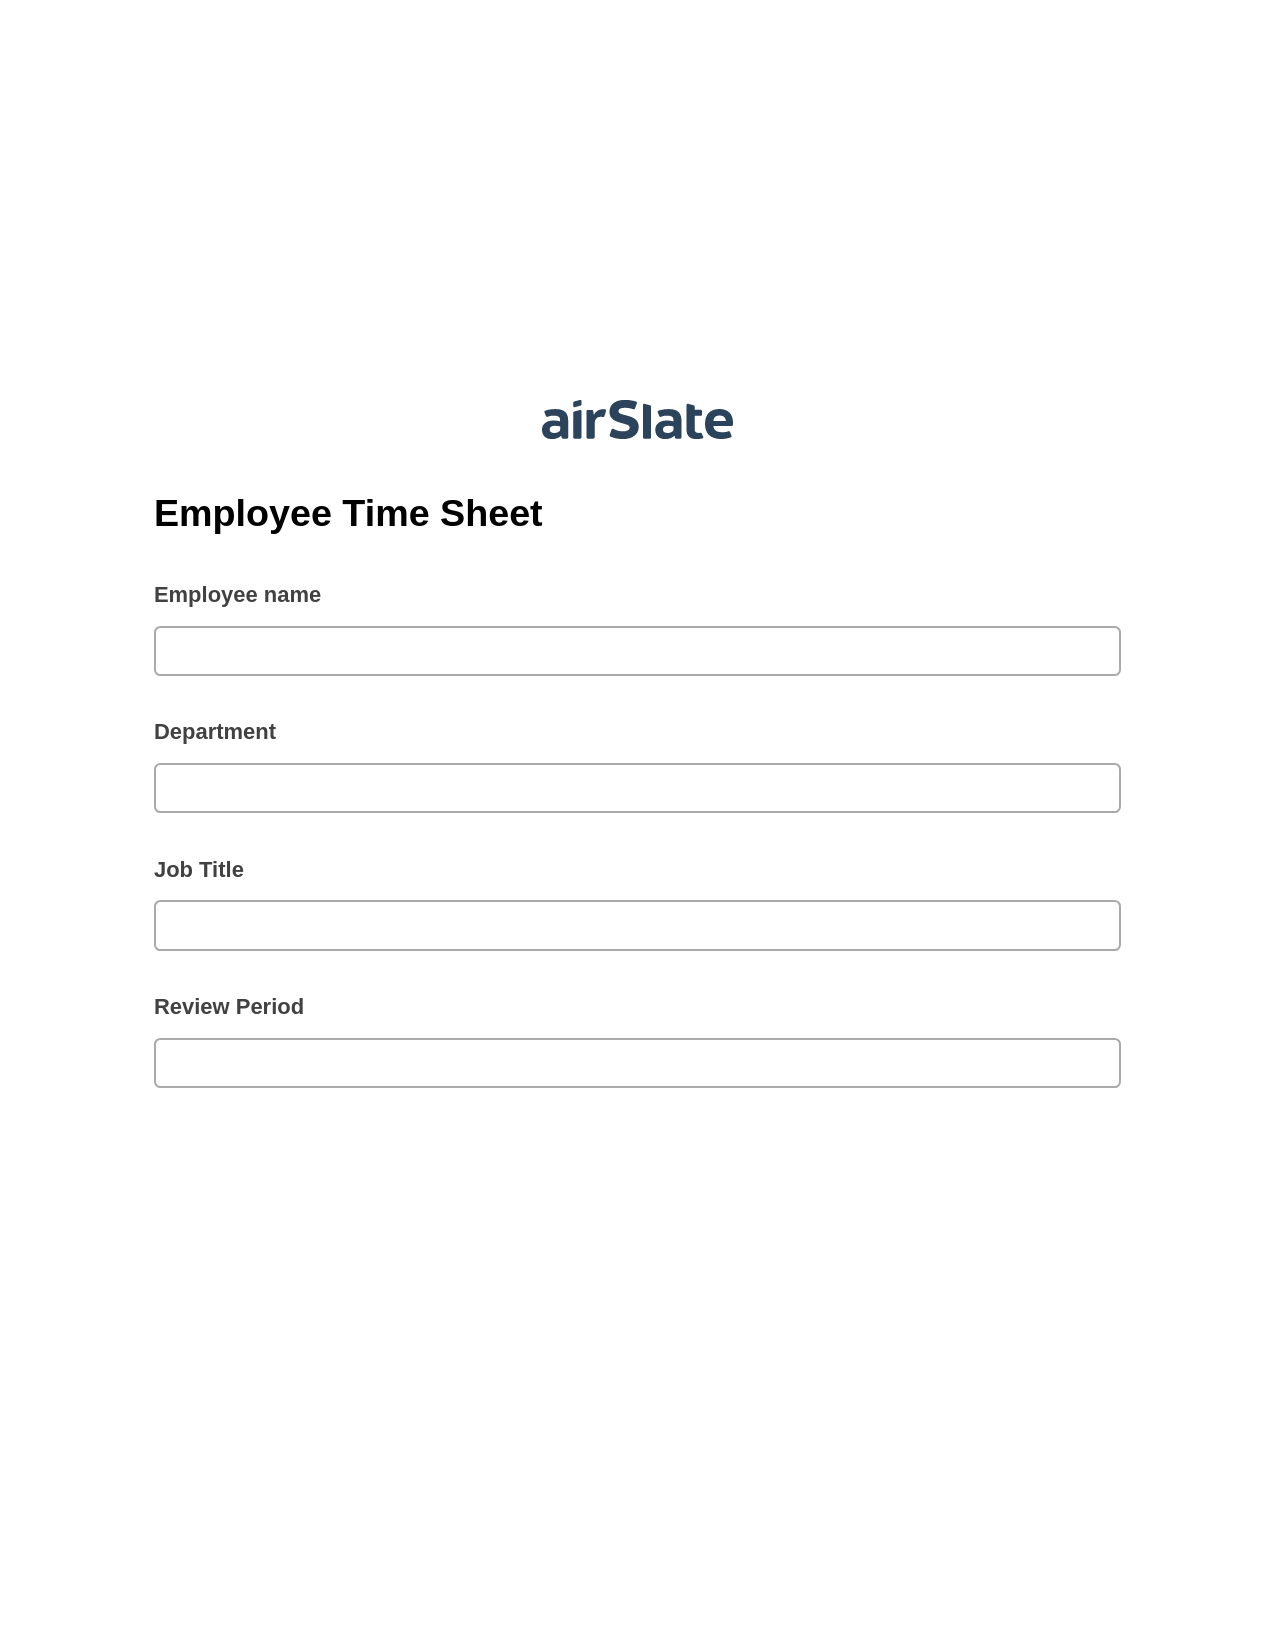 Multirole Employee Time Sheet Pre-fill from MS Dynamics 365 Records, Create slate addon, Export to Google Sheet Bot